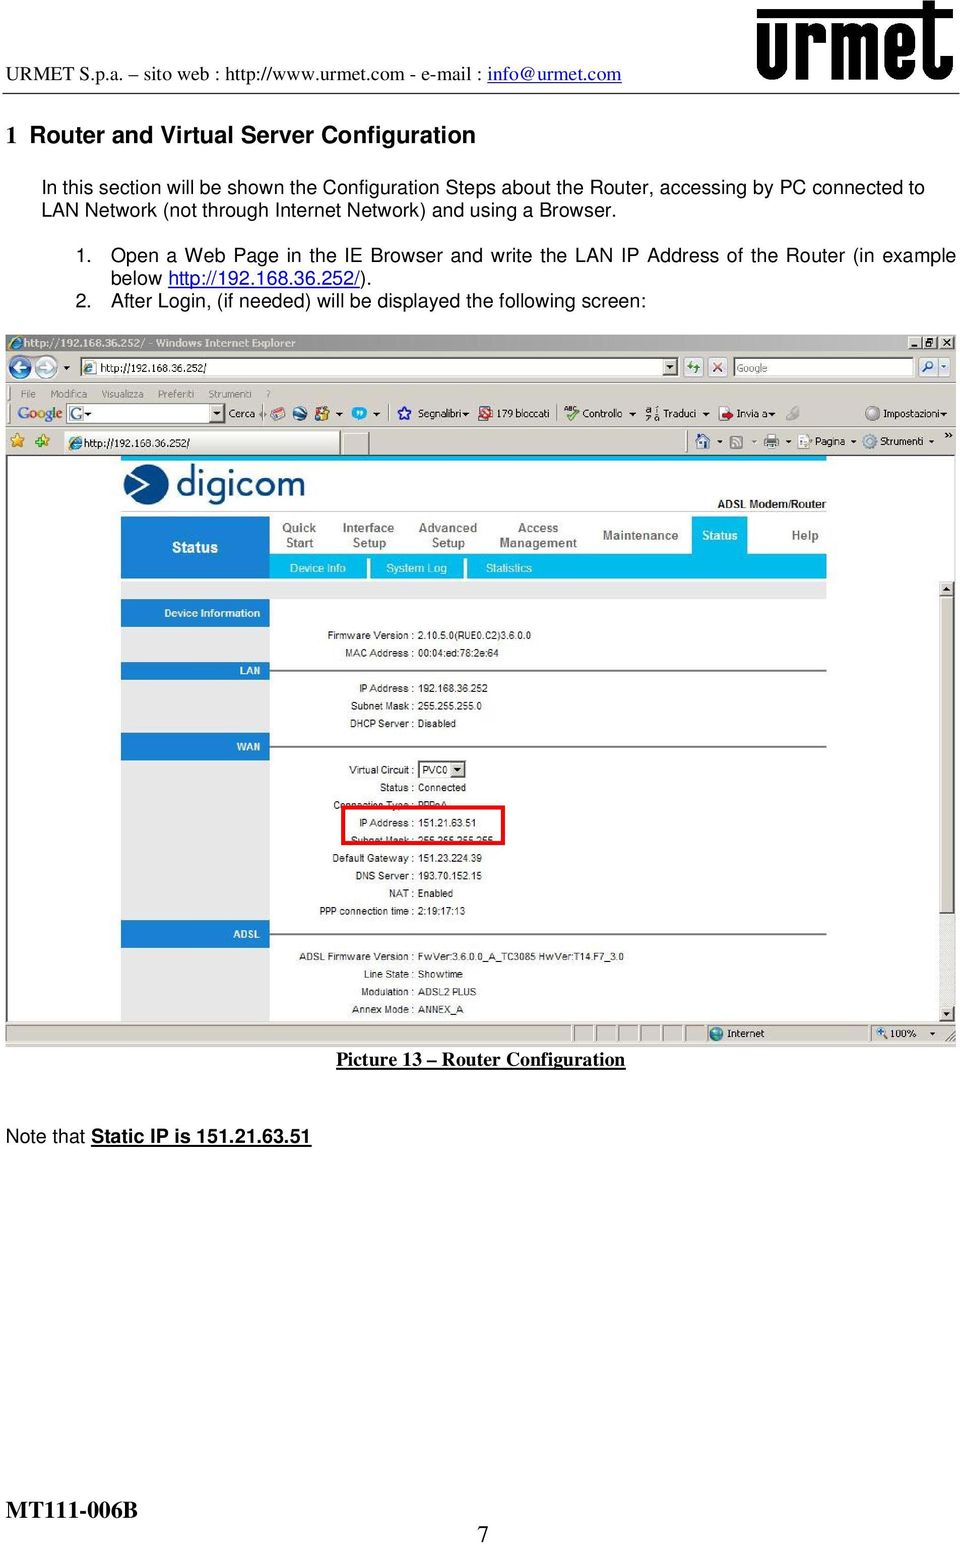 Open a Web Page in the IE Browser and write the LAN IP Address of the Router (in example below http://192.168.36.